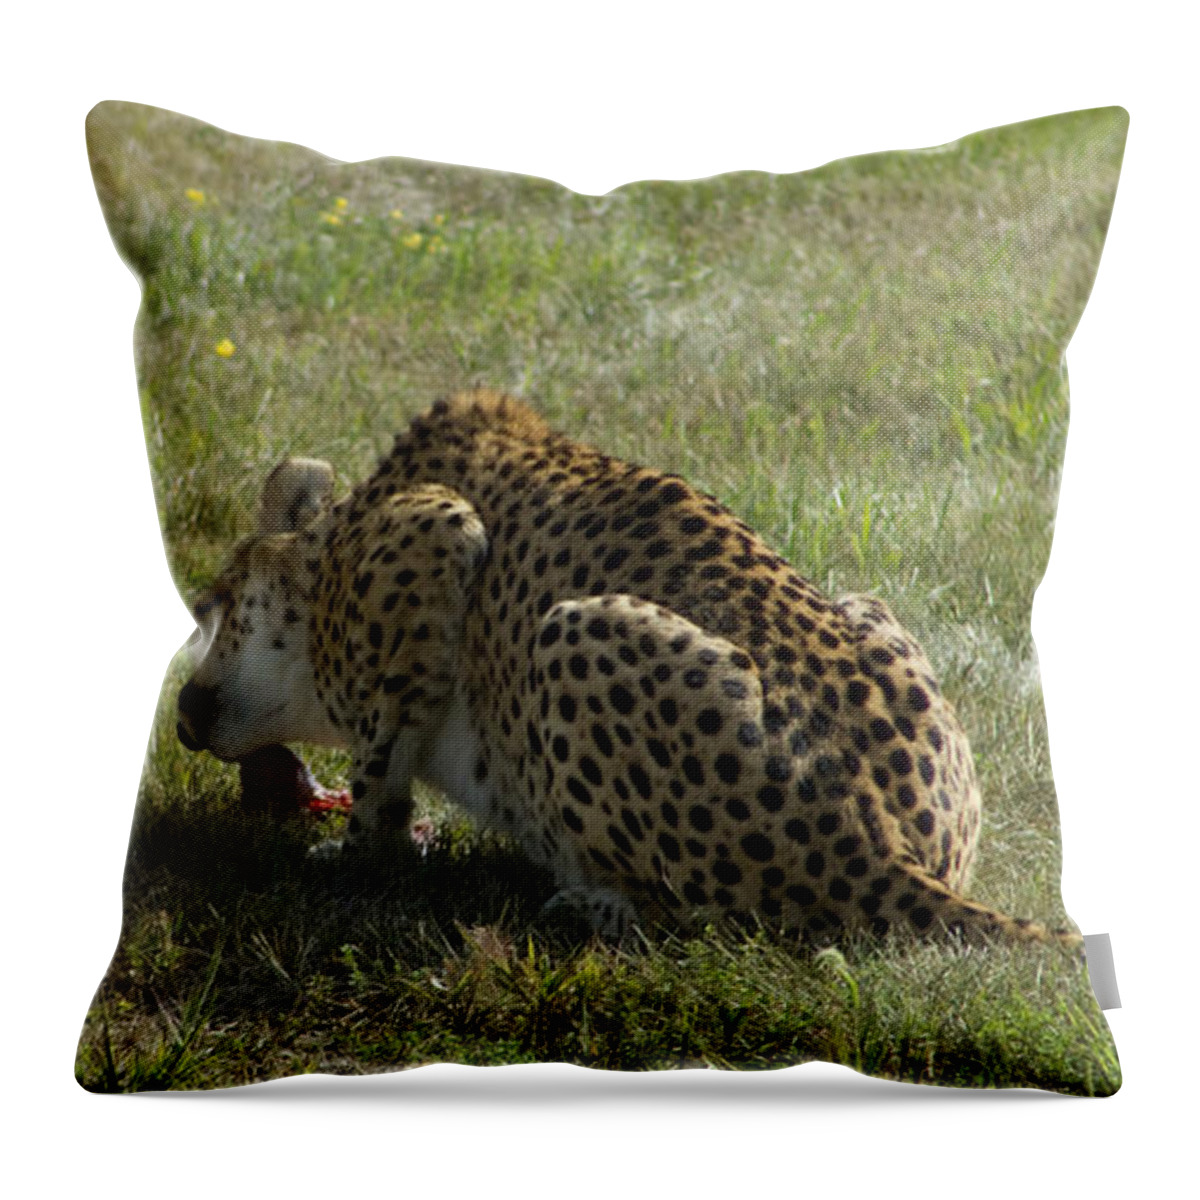 Cheetah Throw Pillow featuring the photograph Having Lunch by David Yocum